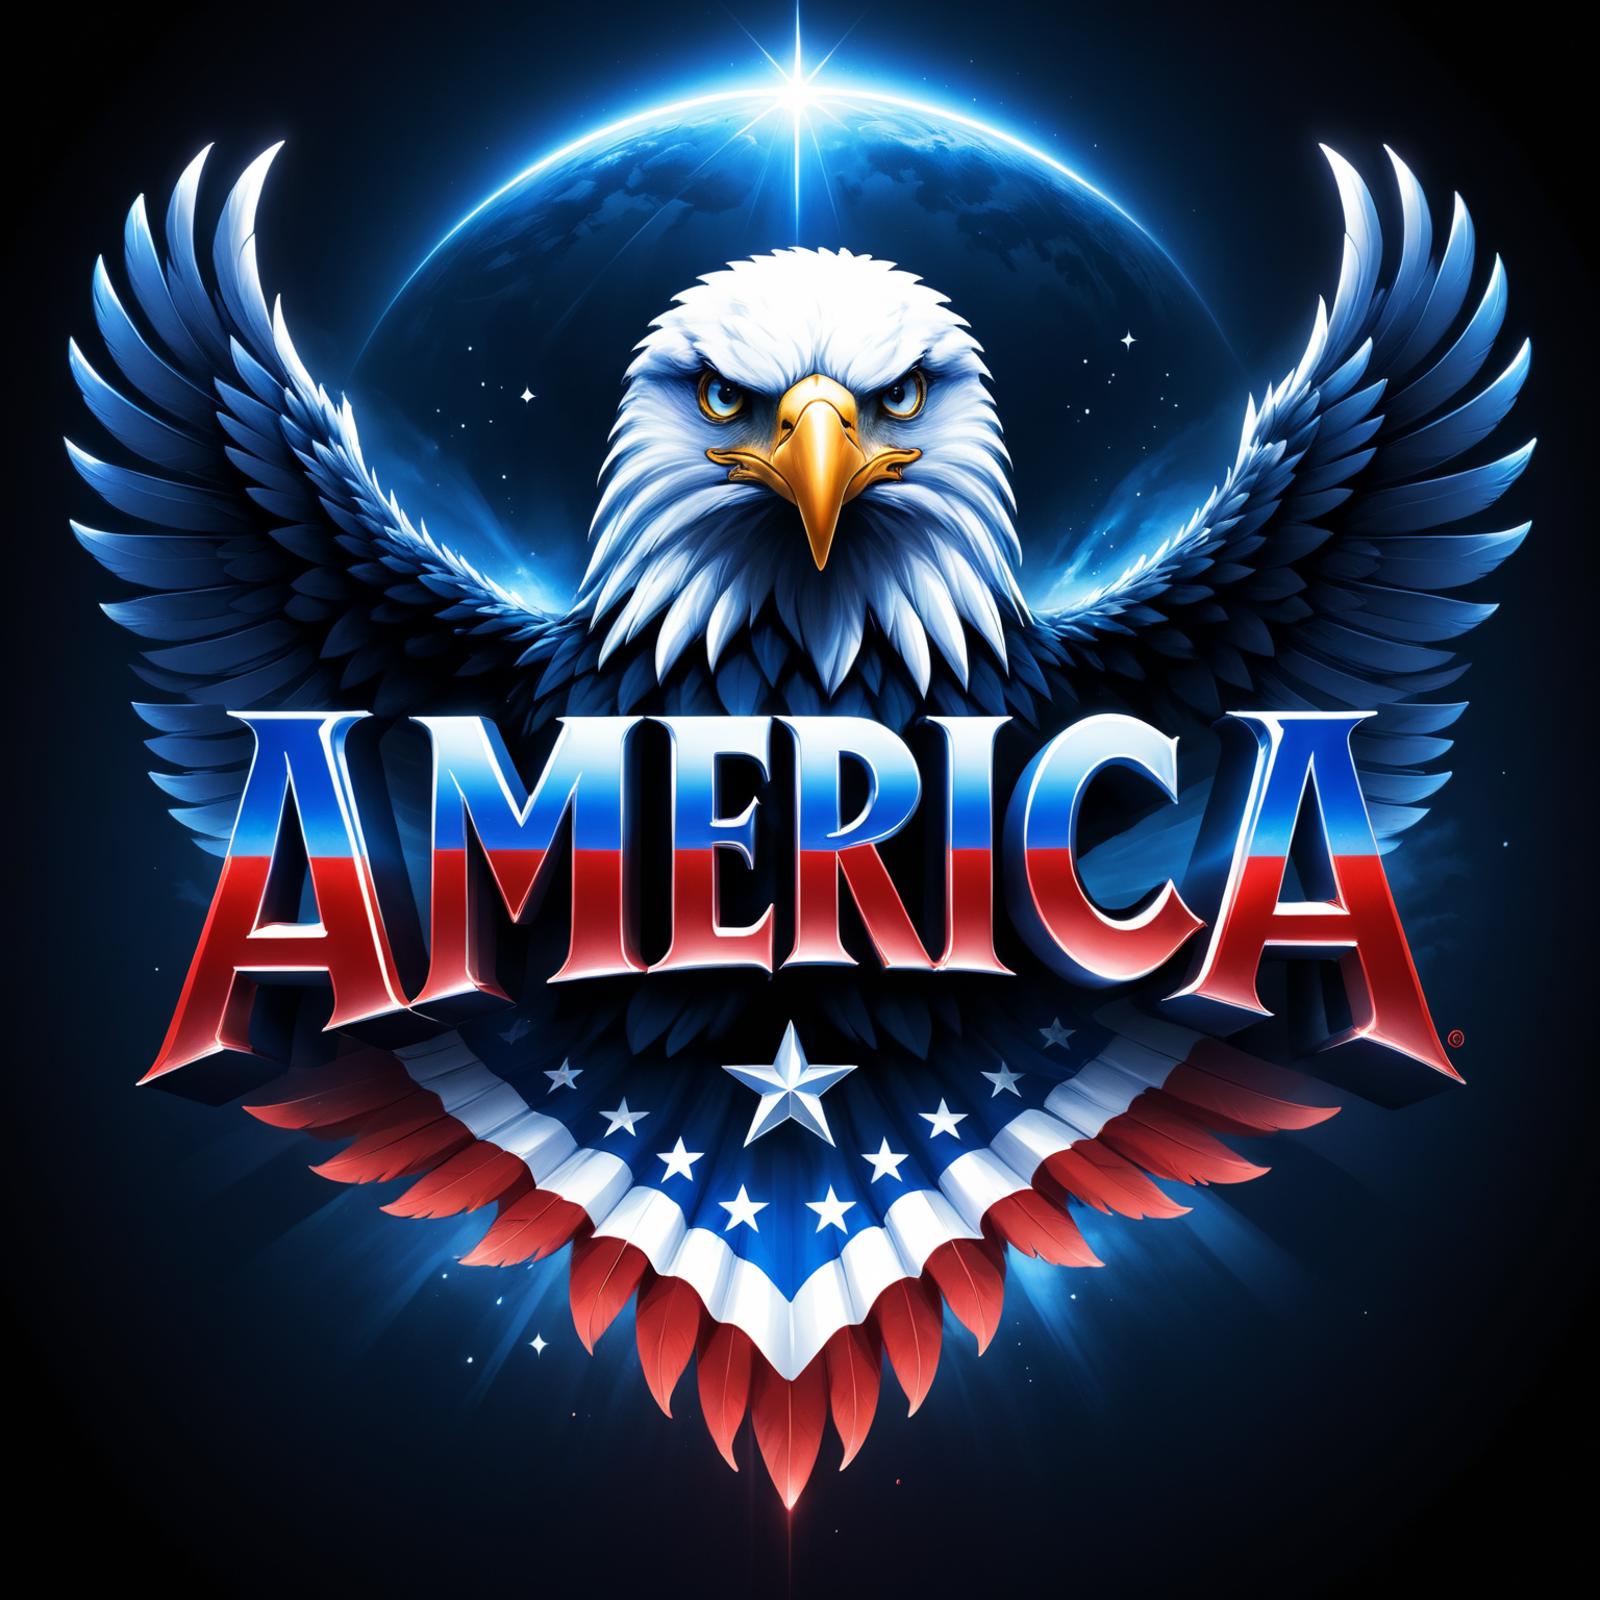 A colorful and patriotic image of the United States of America with an eagle.